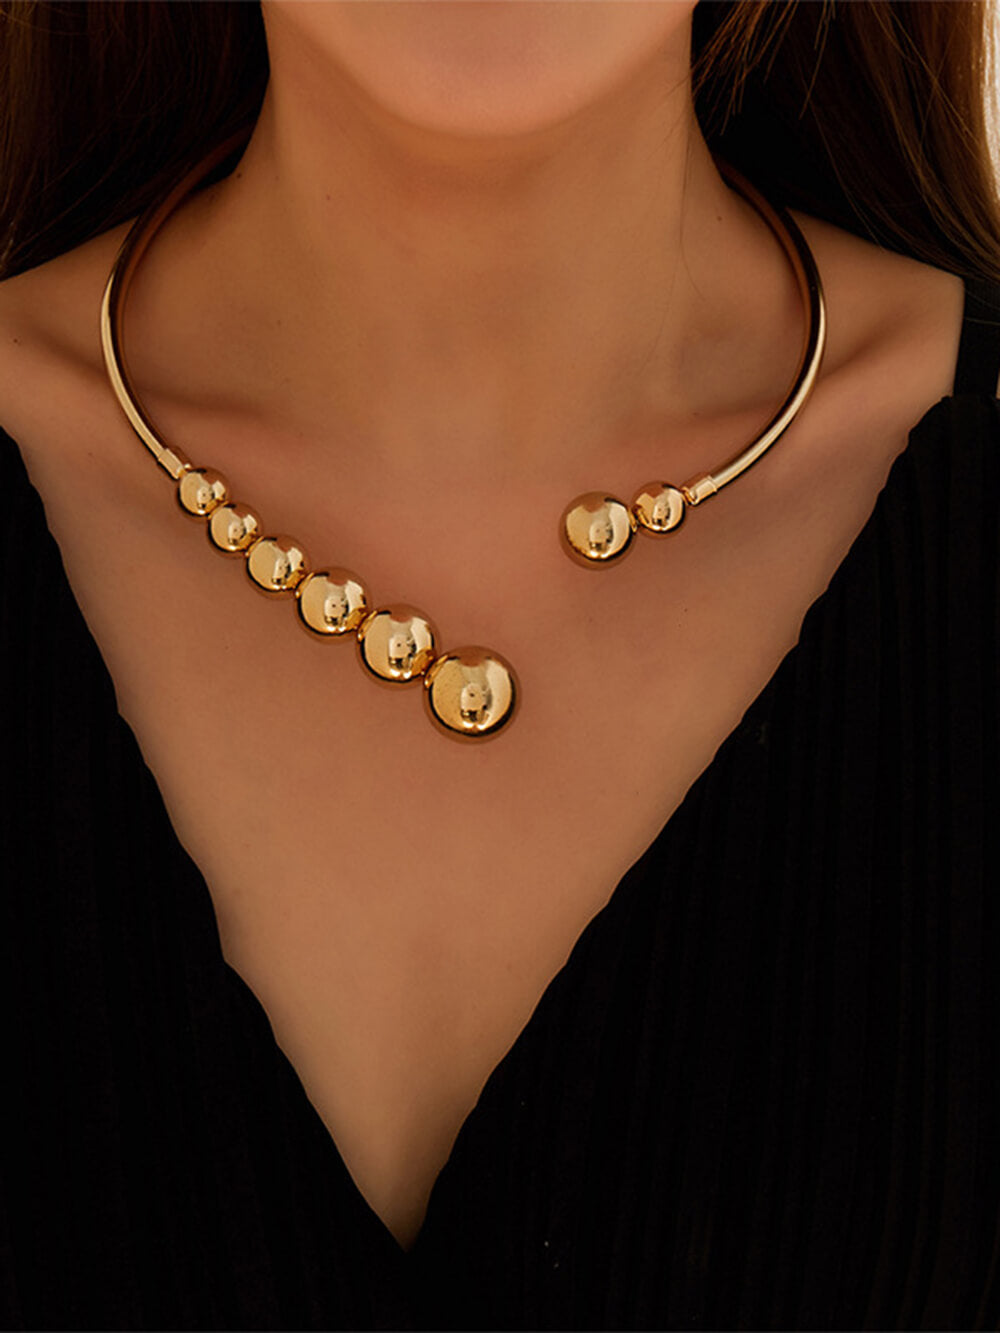 Exquisite Necklace With Small Gold Beads And Open Clavicle Chain